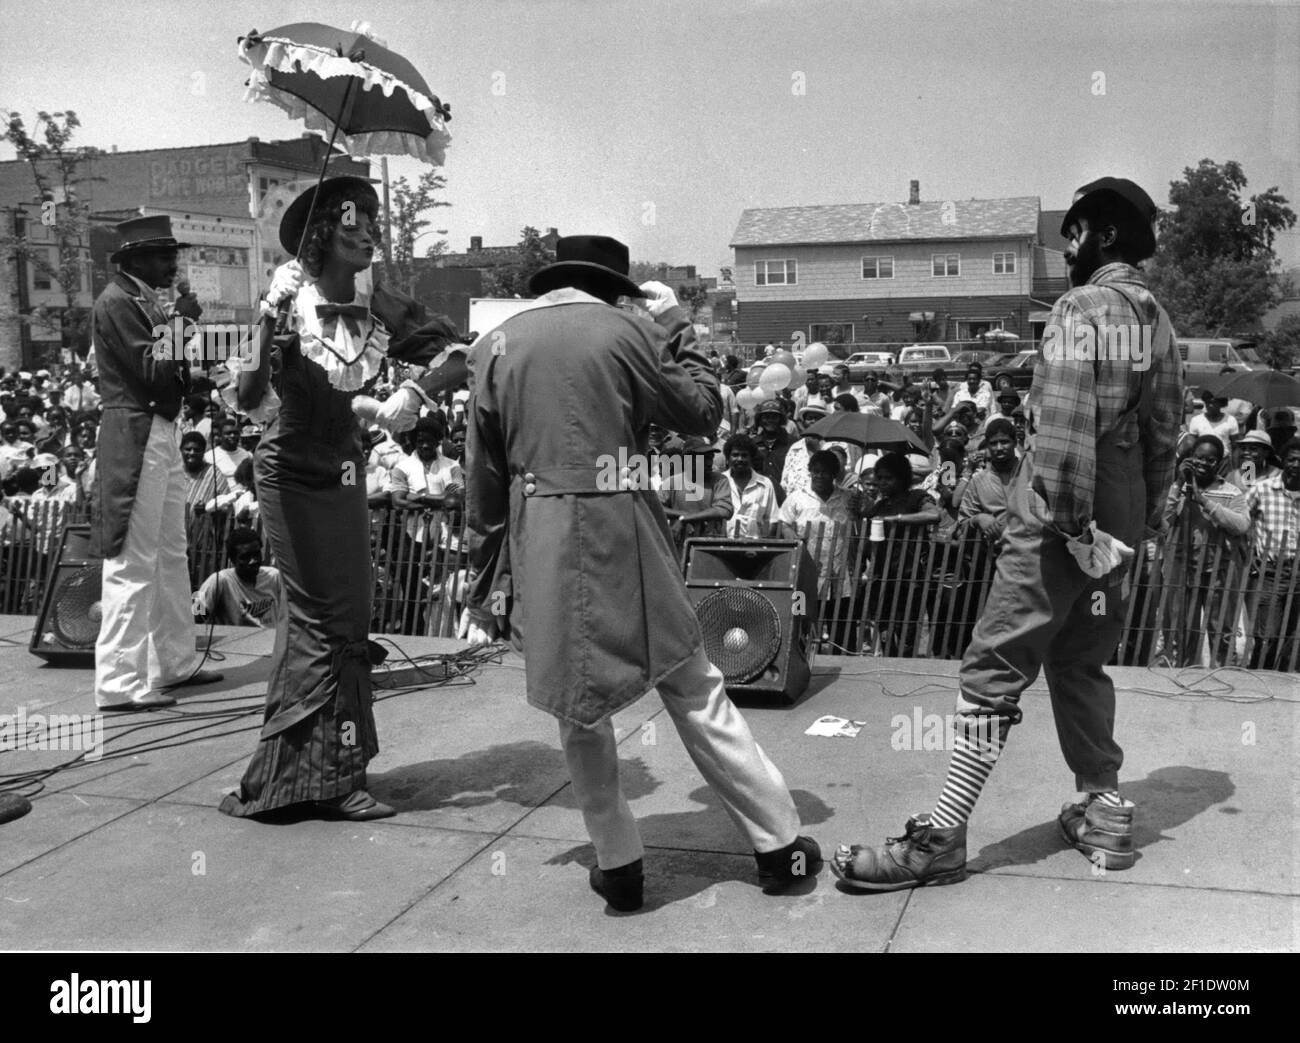 People participate in the 1986 True Colors Of The Circus World Performed At Juneteenth Day in Wisconsin. Juneteenth is celebrated as a commemoration of the ending of slavery in the United States. On June 19, 1865 Union soldiers, led by Major General Gordon Granger, arrived in Galveston, TX to spread the news that the war had ended and that the enslaved were now free. The announcement came two year after President Abraham Lincoln’s Emancipation Proclamation given on January 1, 1983, which was not enforced in Texas due to a lack of Union Troops in the area. (Photo by Milwaukee Journal Sentinel f Stock Photo